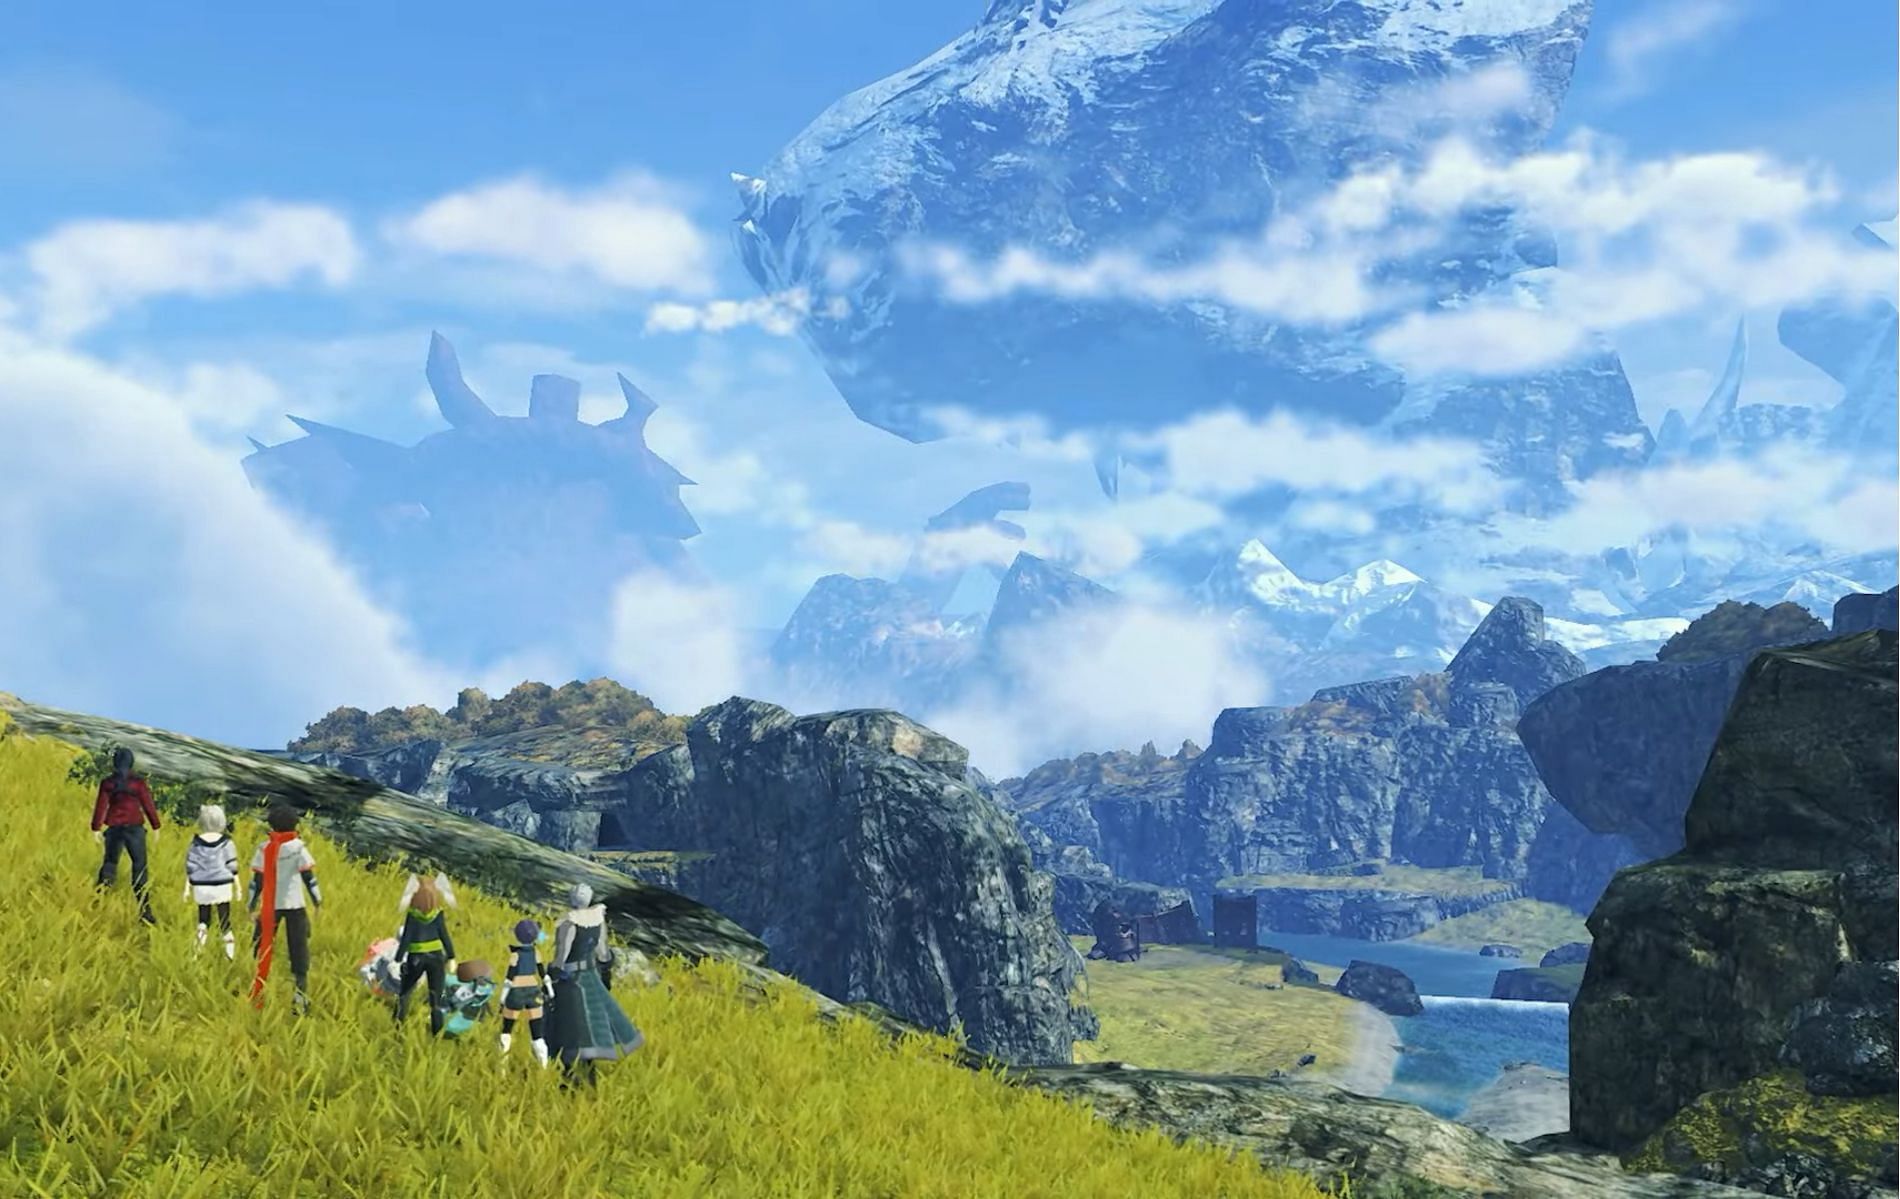 Xenoblade Chronicles 3 Direct Showcases Characters, Combat And More